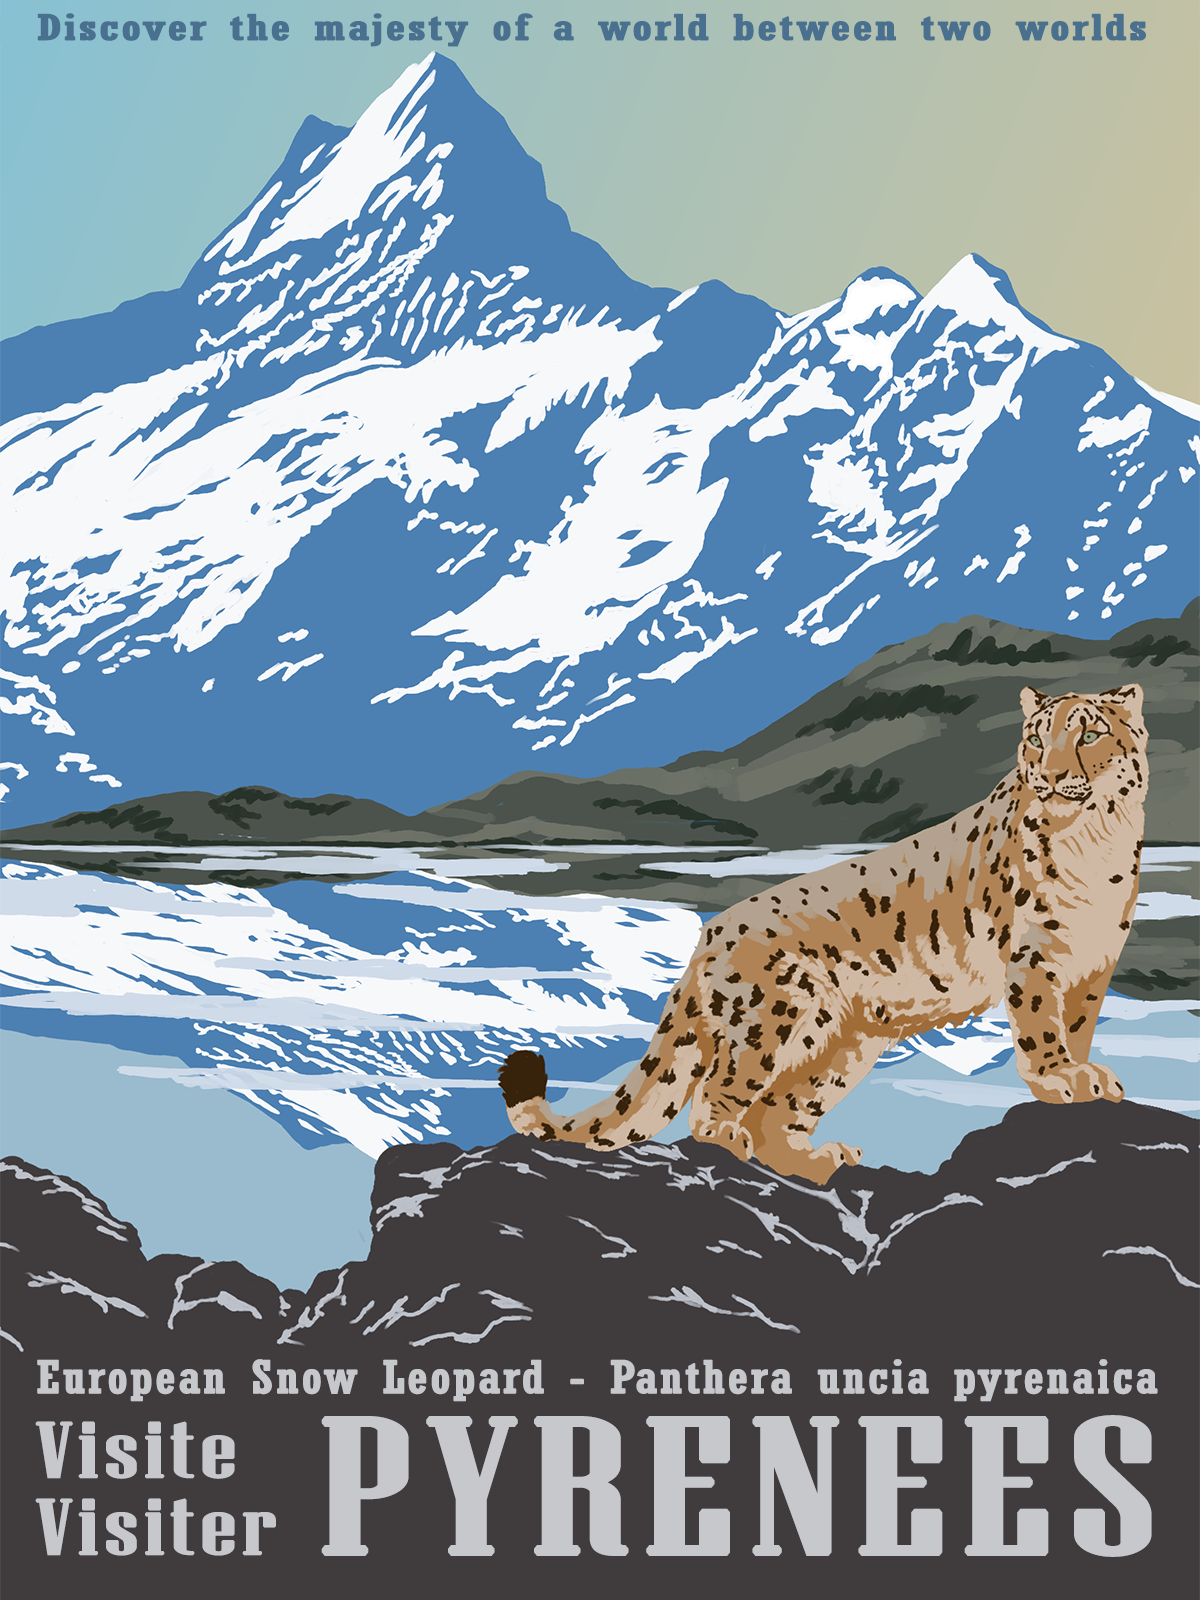 Poster Leopardenmuster